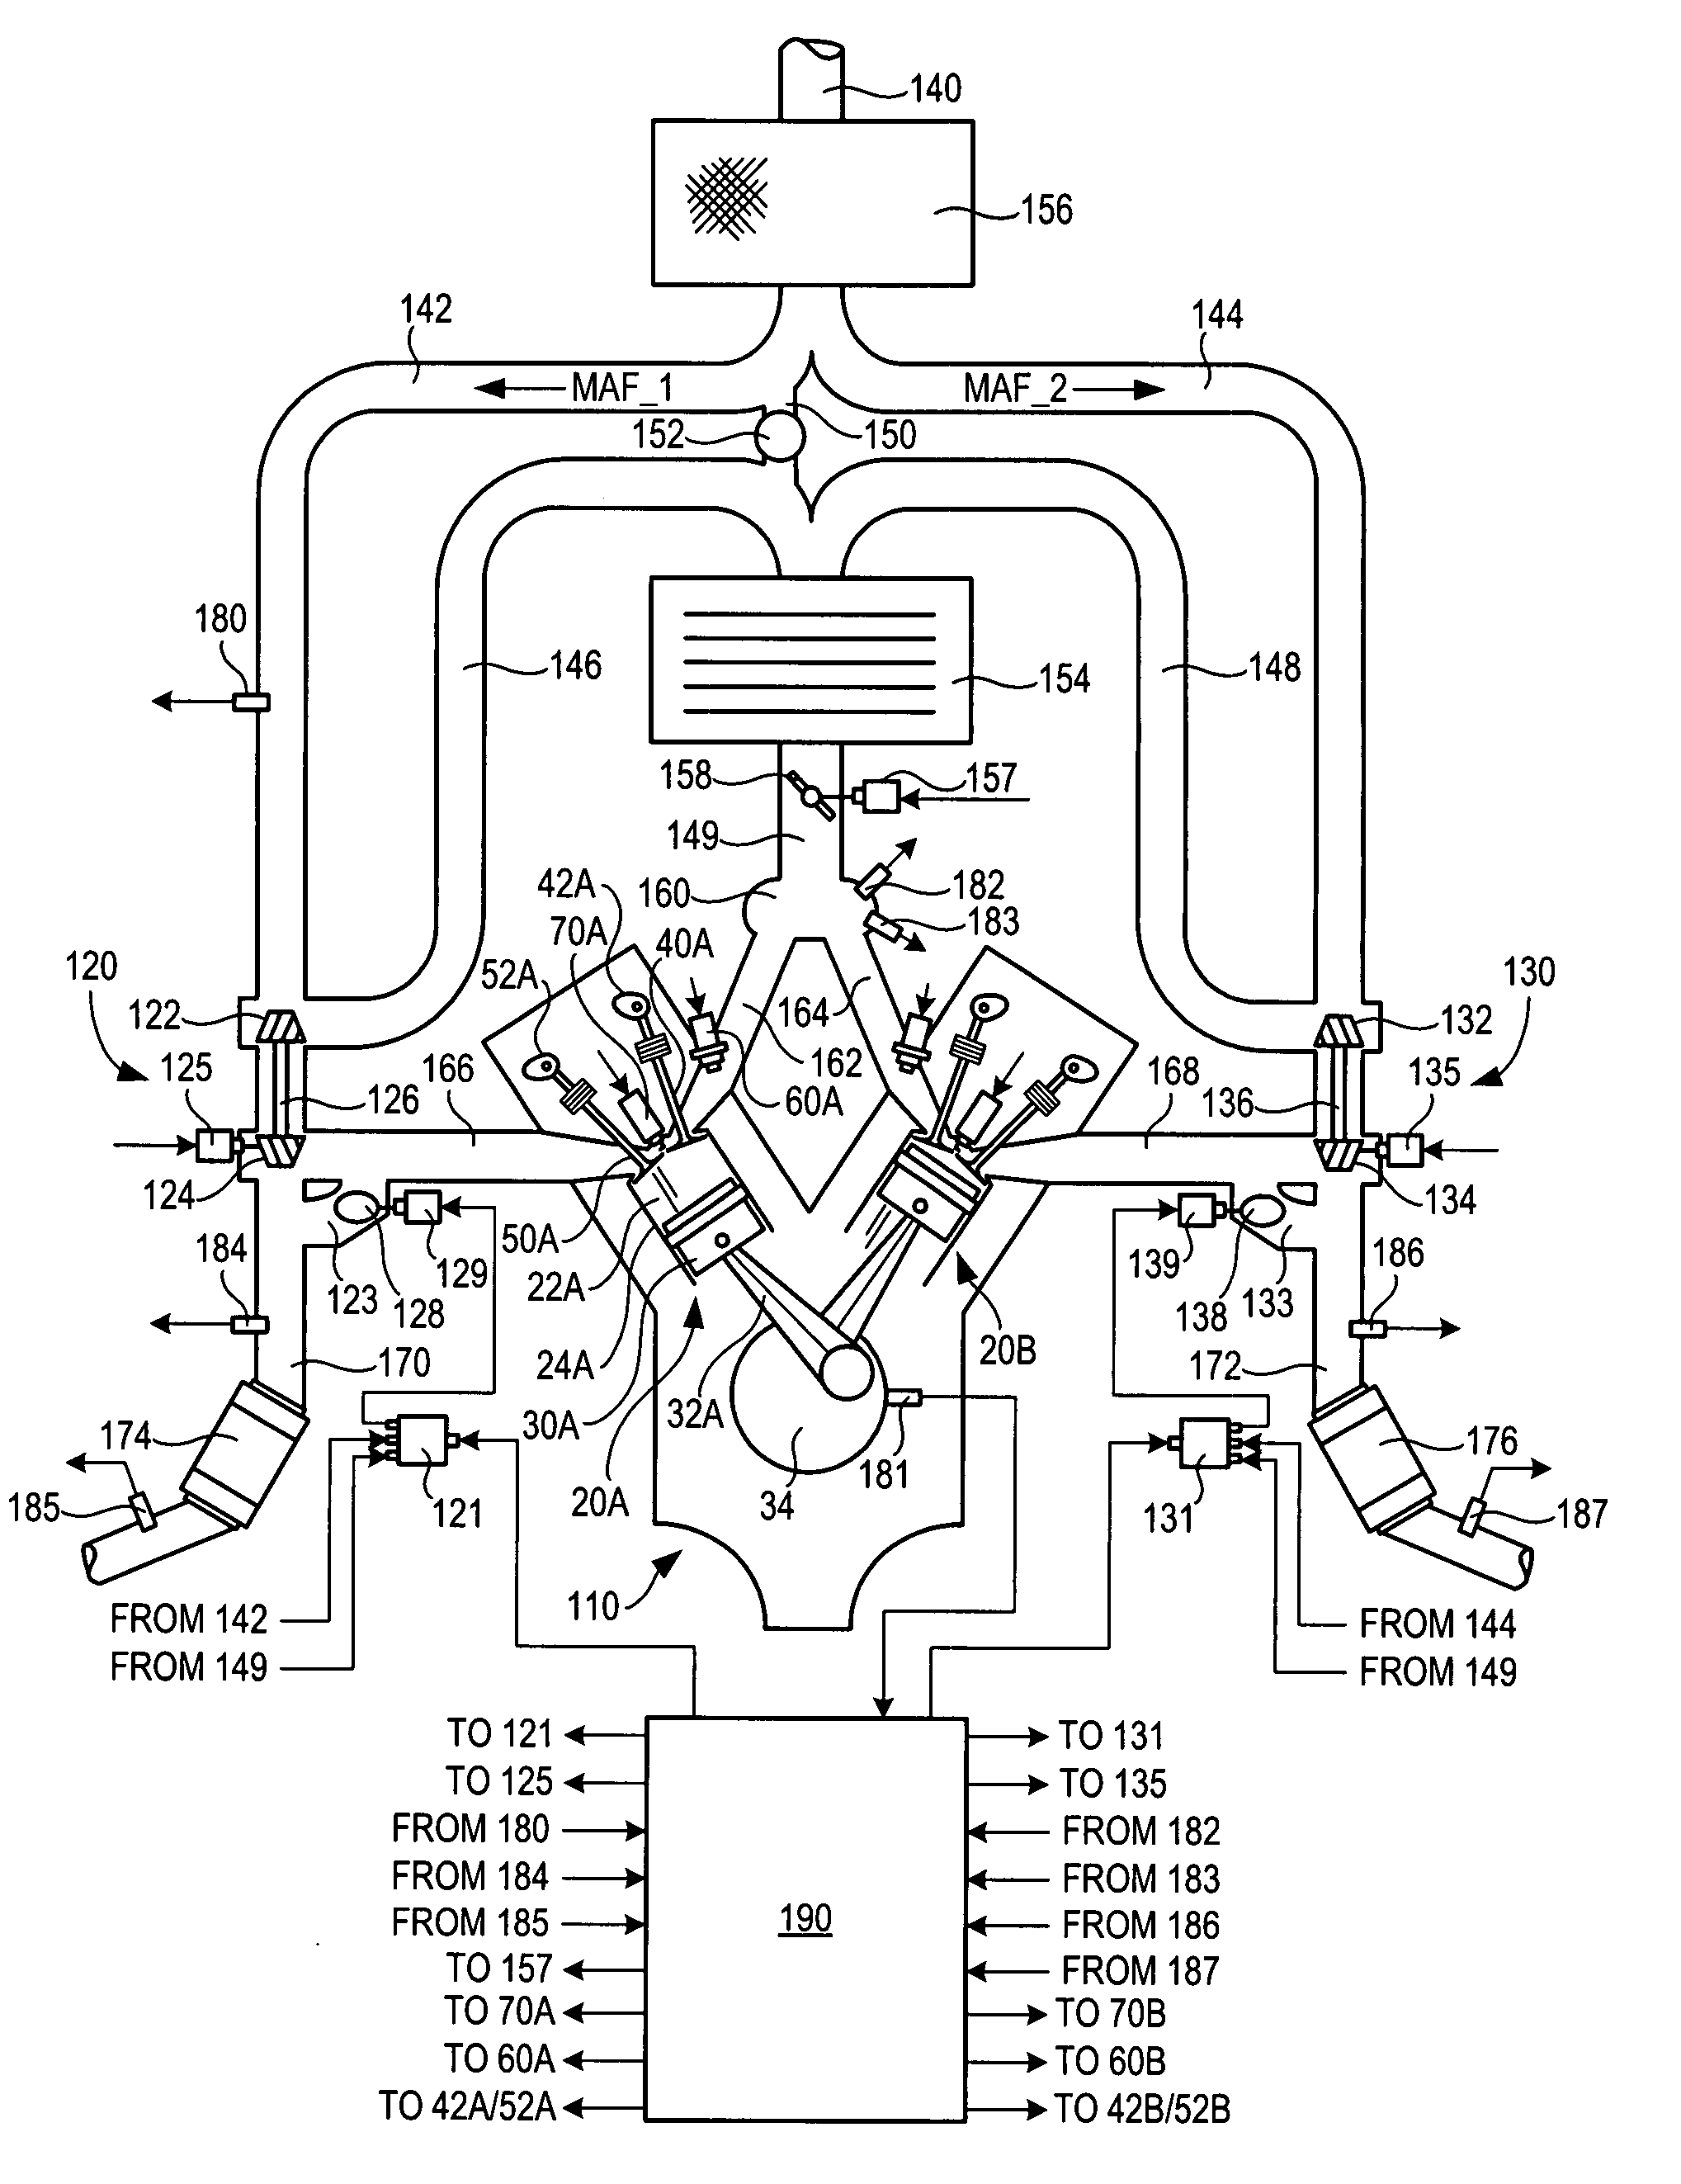 Airflow Balance for a Twin Turbocharged Engine System